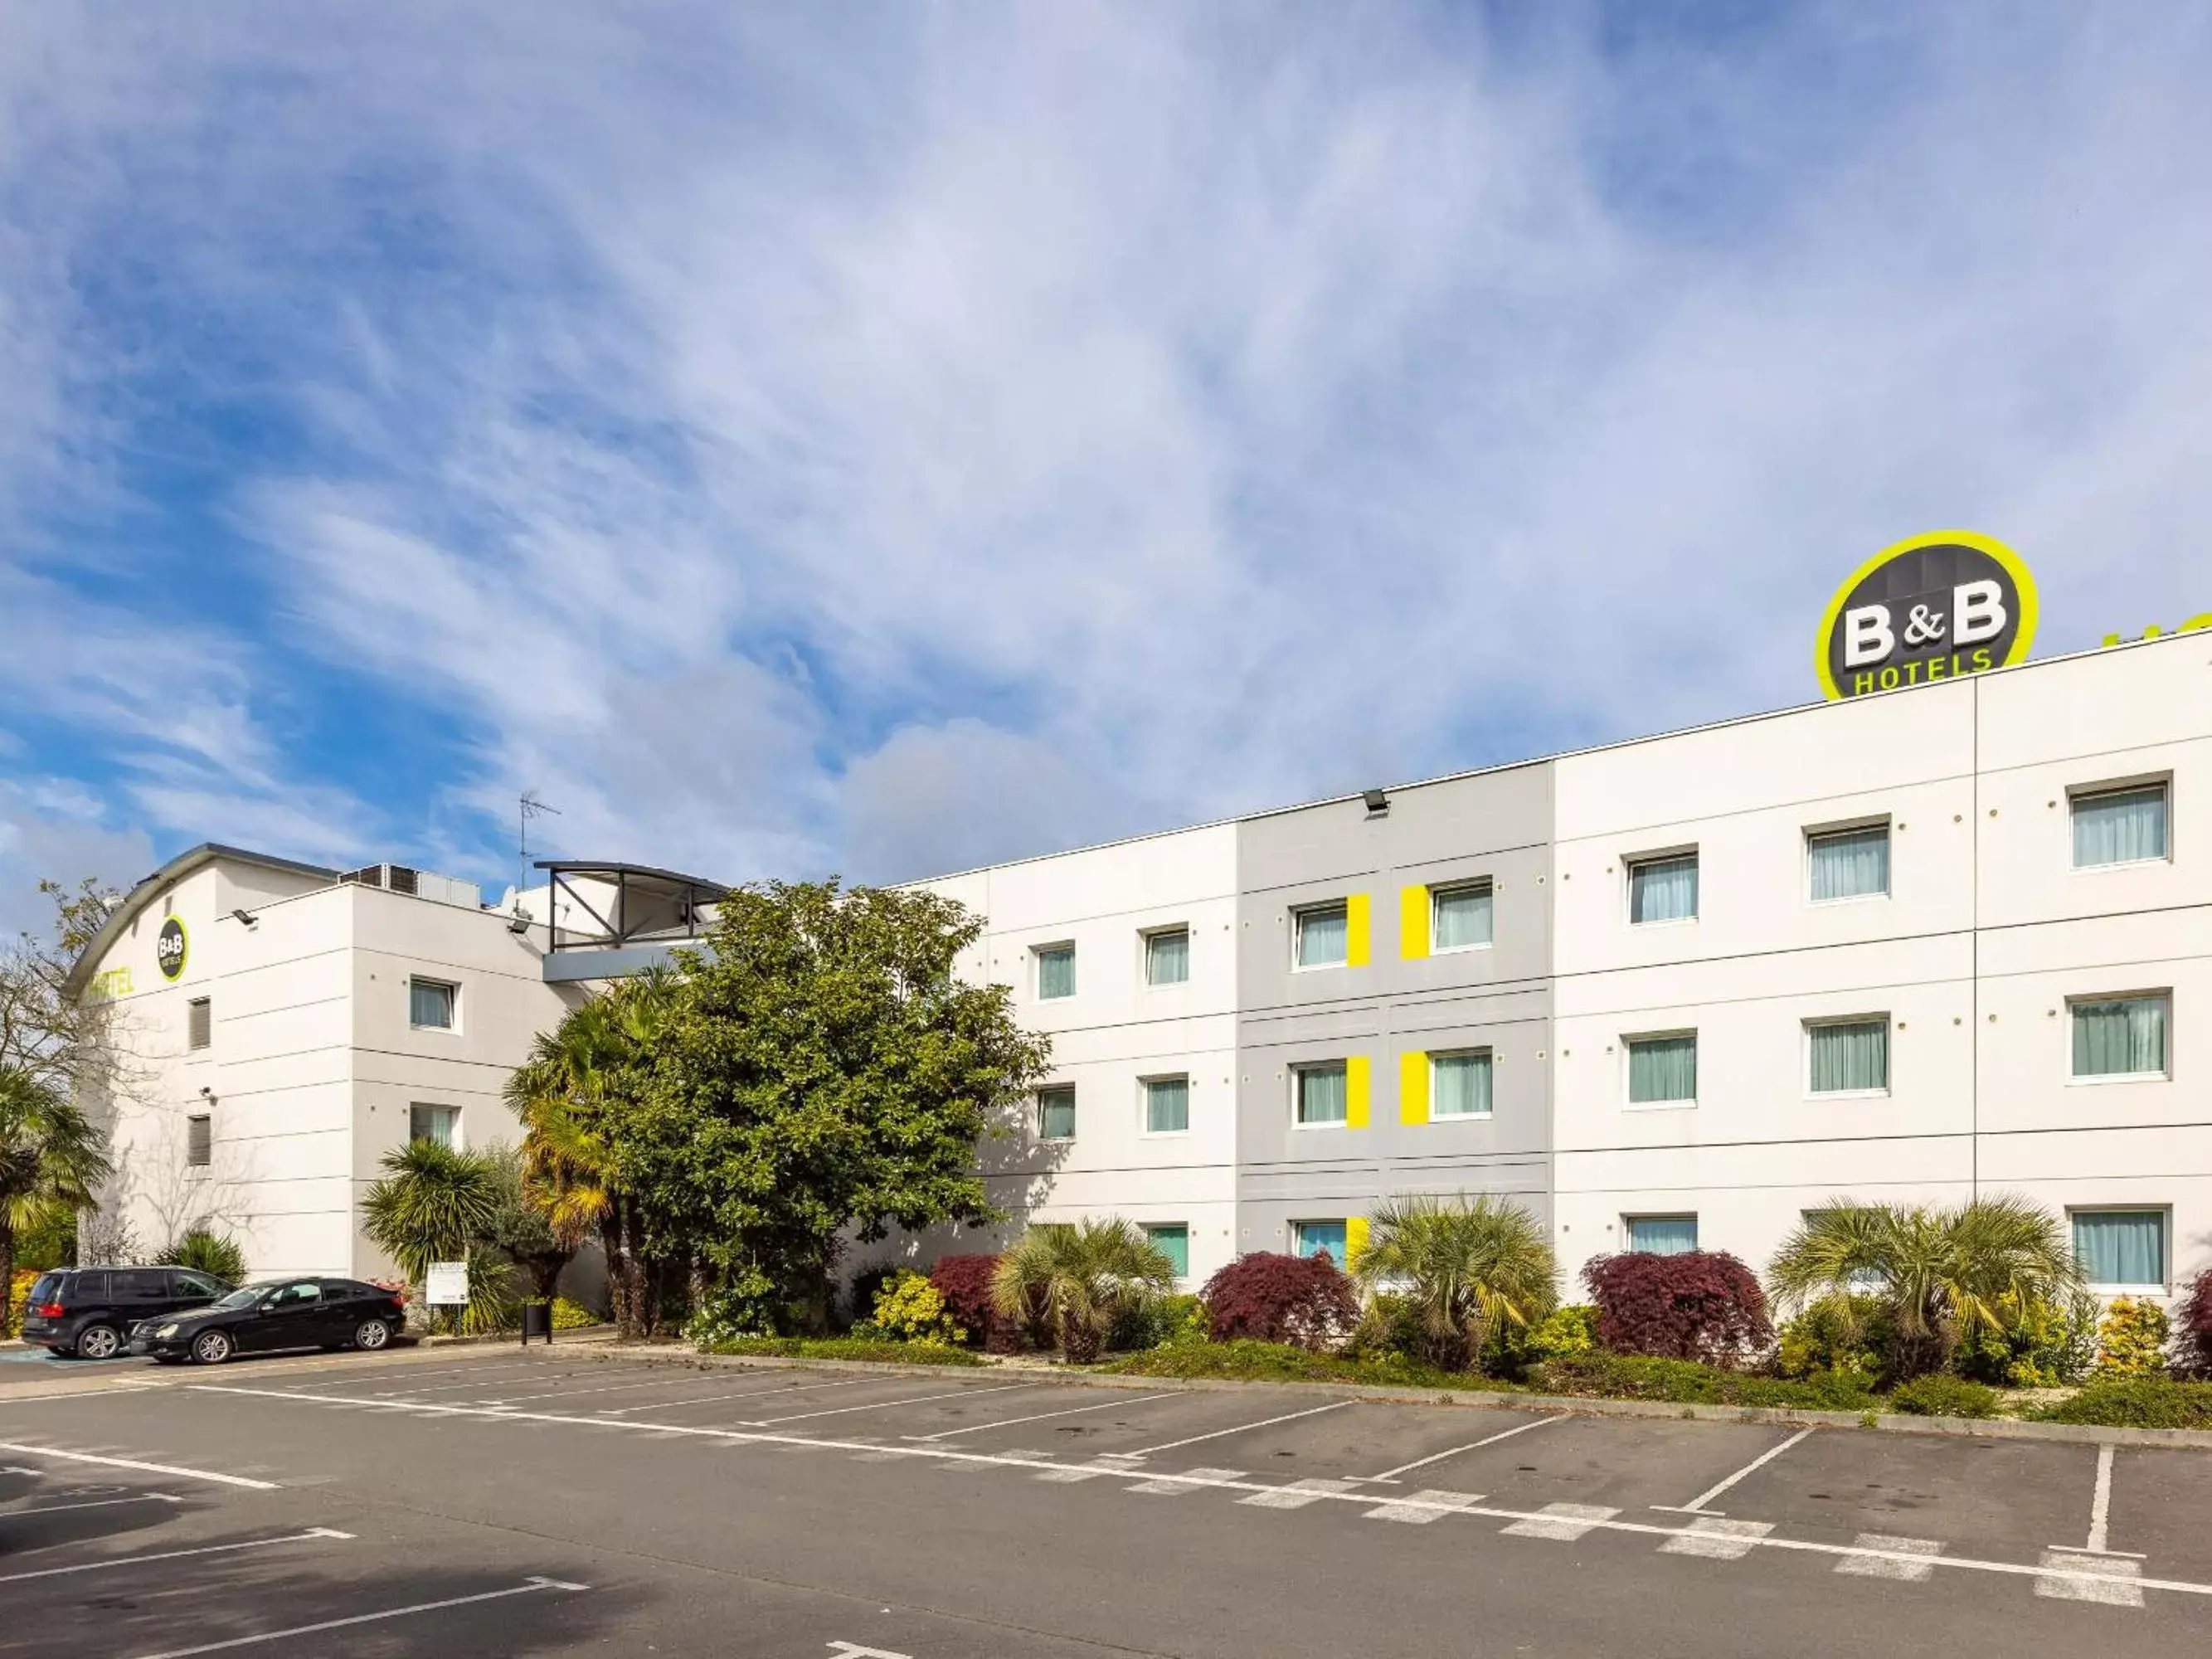 Property Building in B&B HOTEL Rennes Sud Chantepie